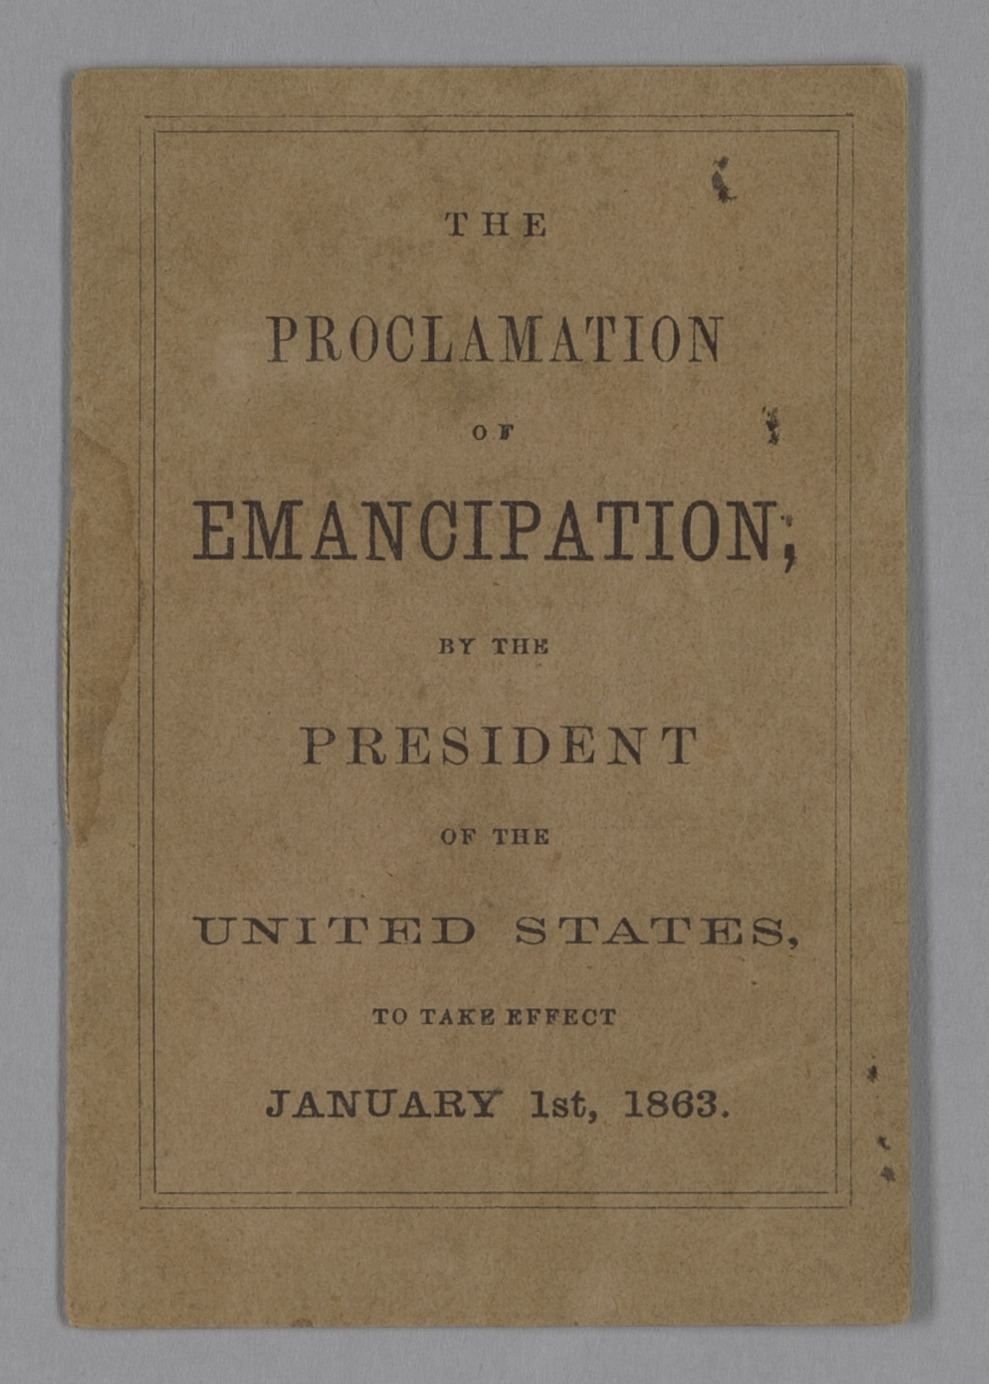 Original pamphlet for the Emancipation Proclamation